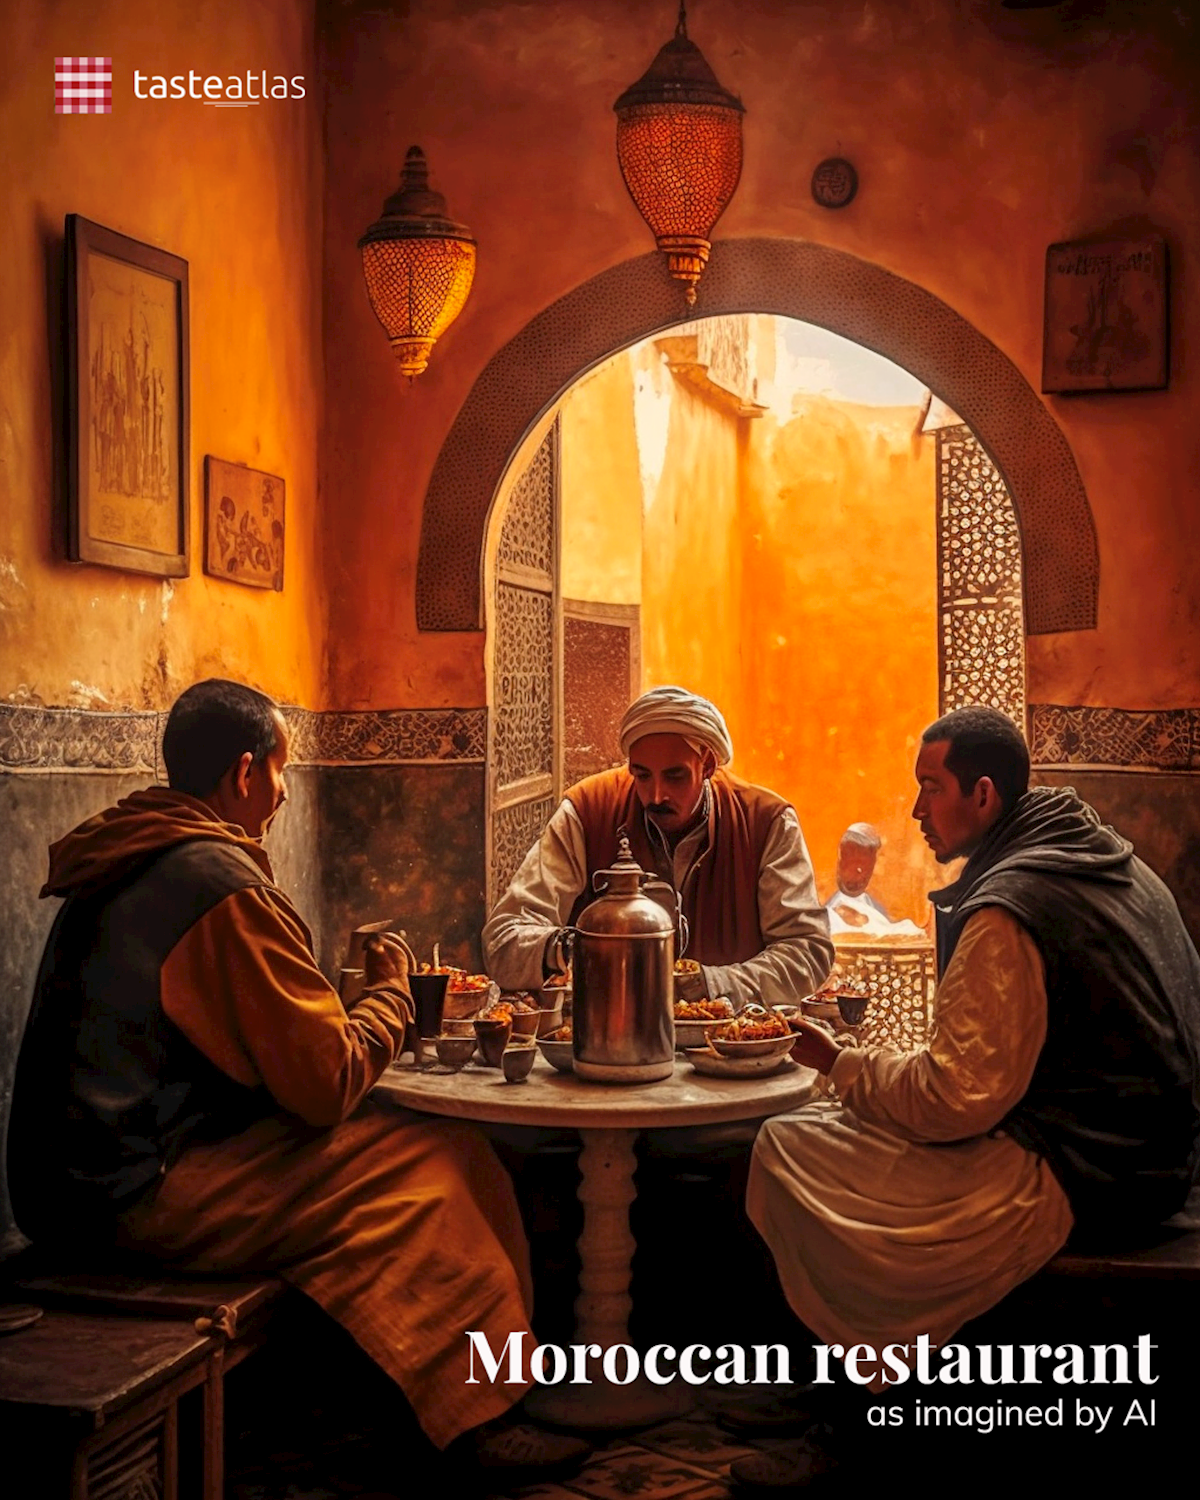 Prompt: Imagine locals eating in a traditional Moroccan restaurant